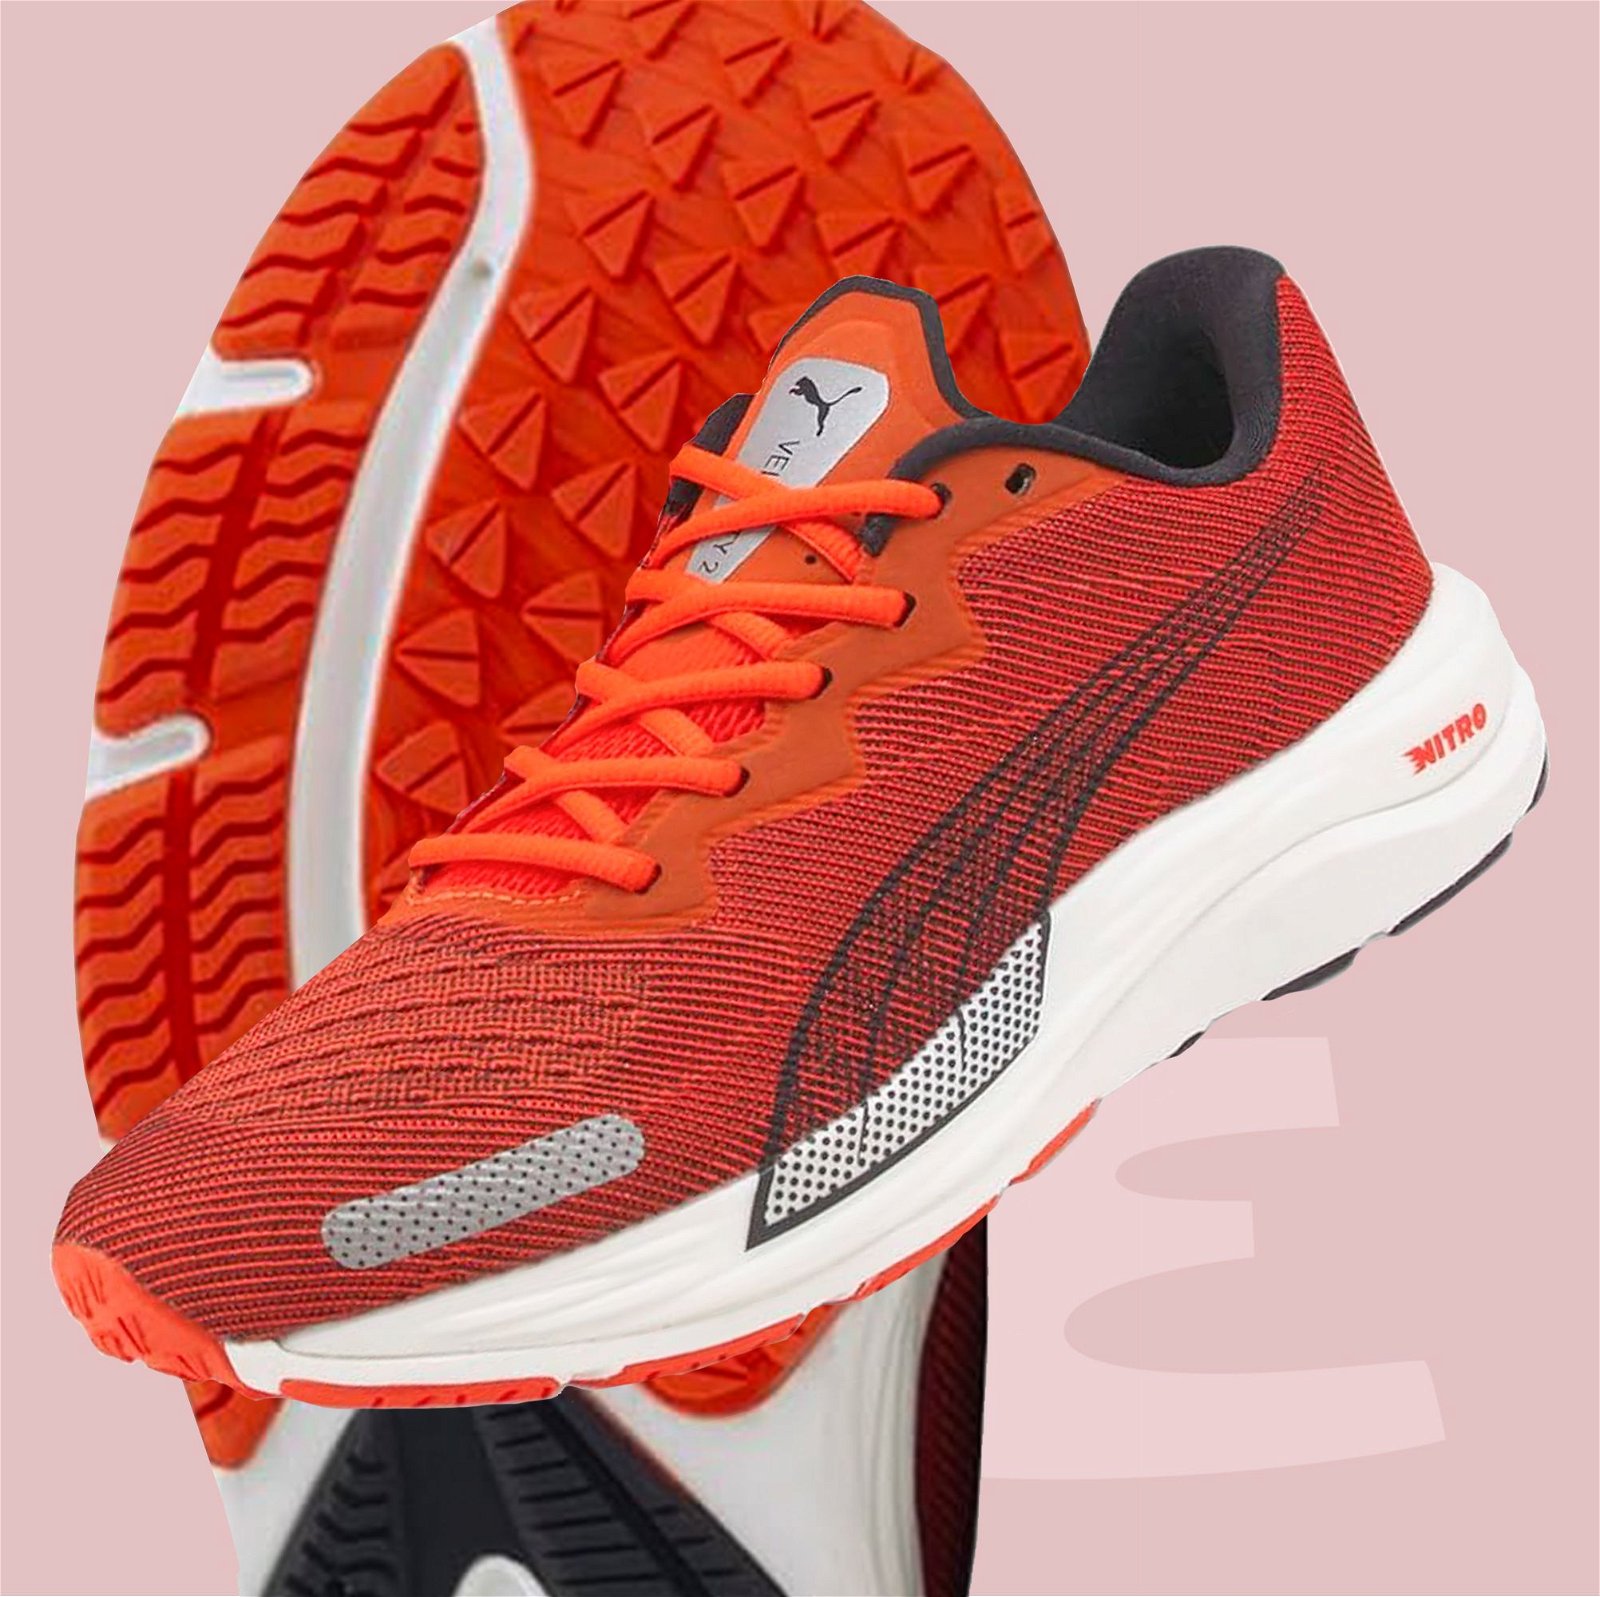 Save Up to 50% on Running Shoes at Amazon's Big Spring Sale Event